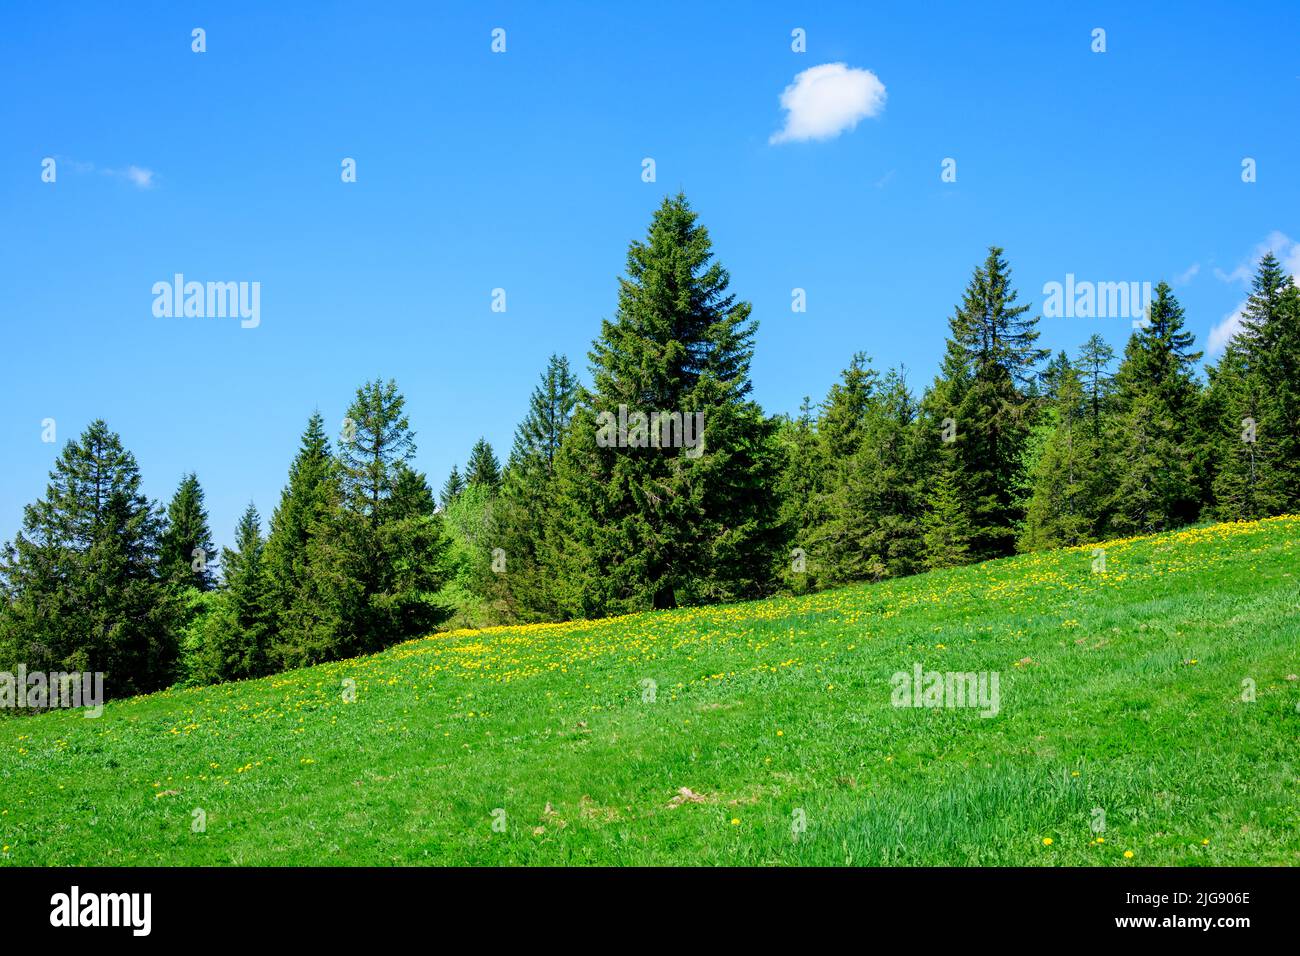 Germany, Baden-Württemberg, Black Forest, Feldberg, meadow with coniferous forest. Stock Photo